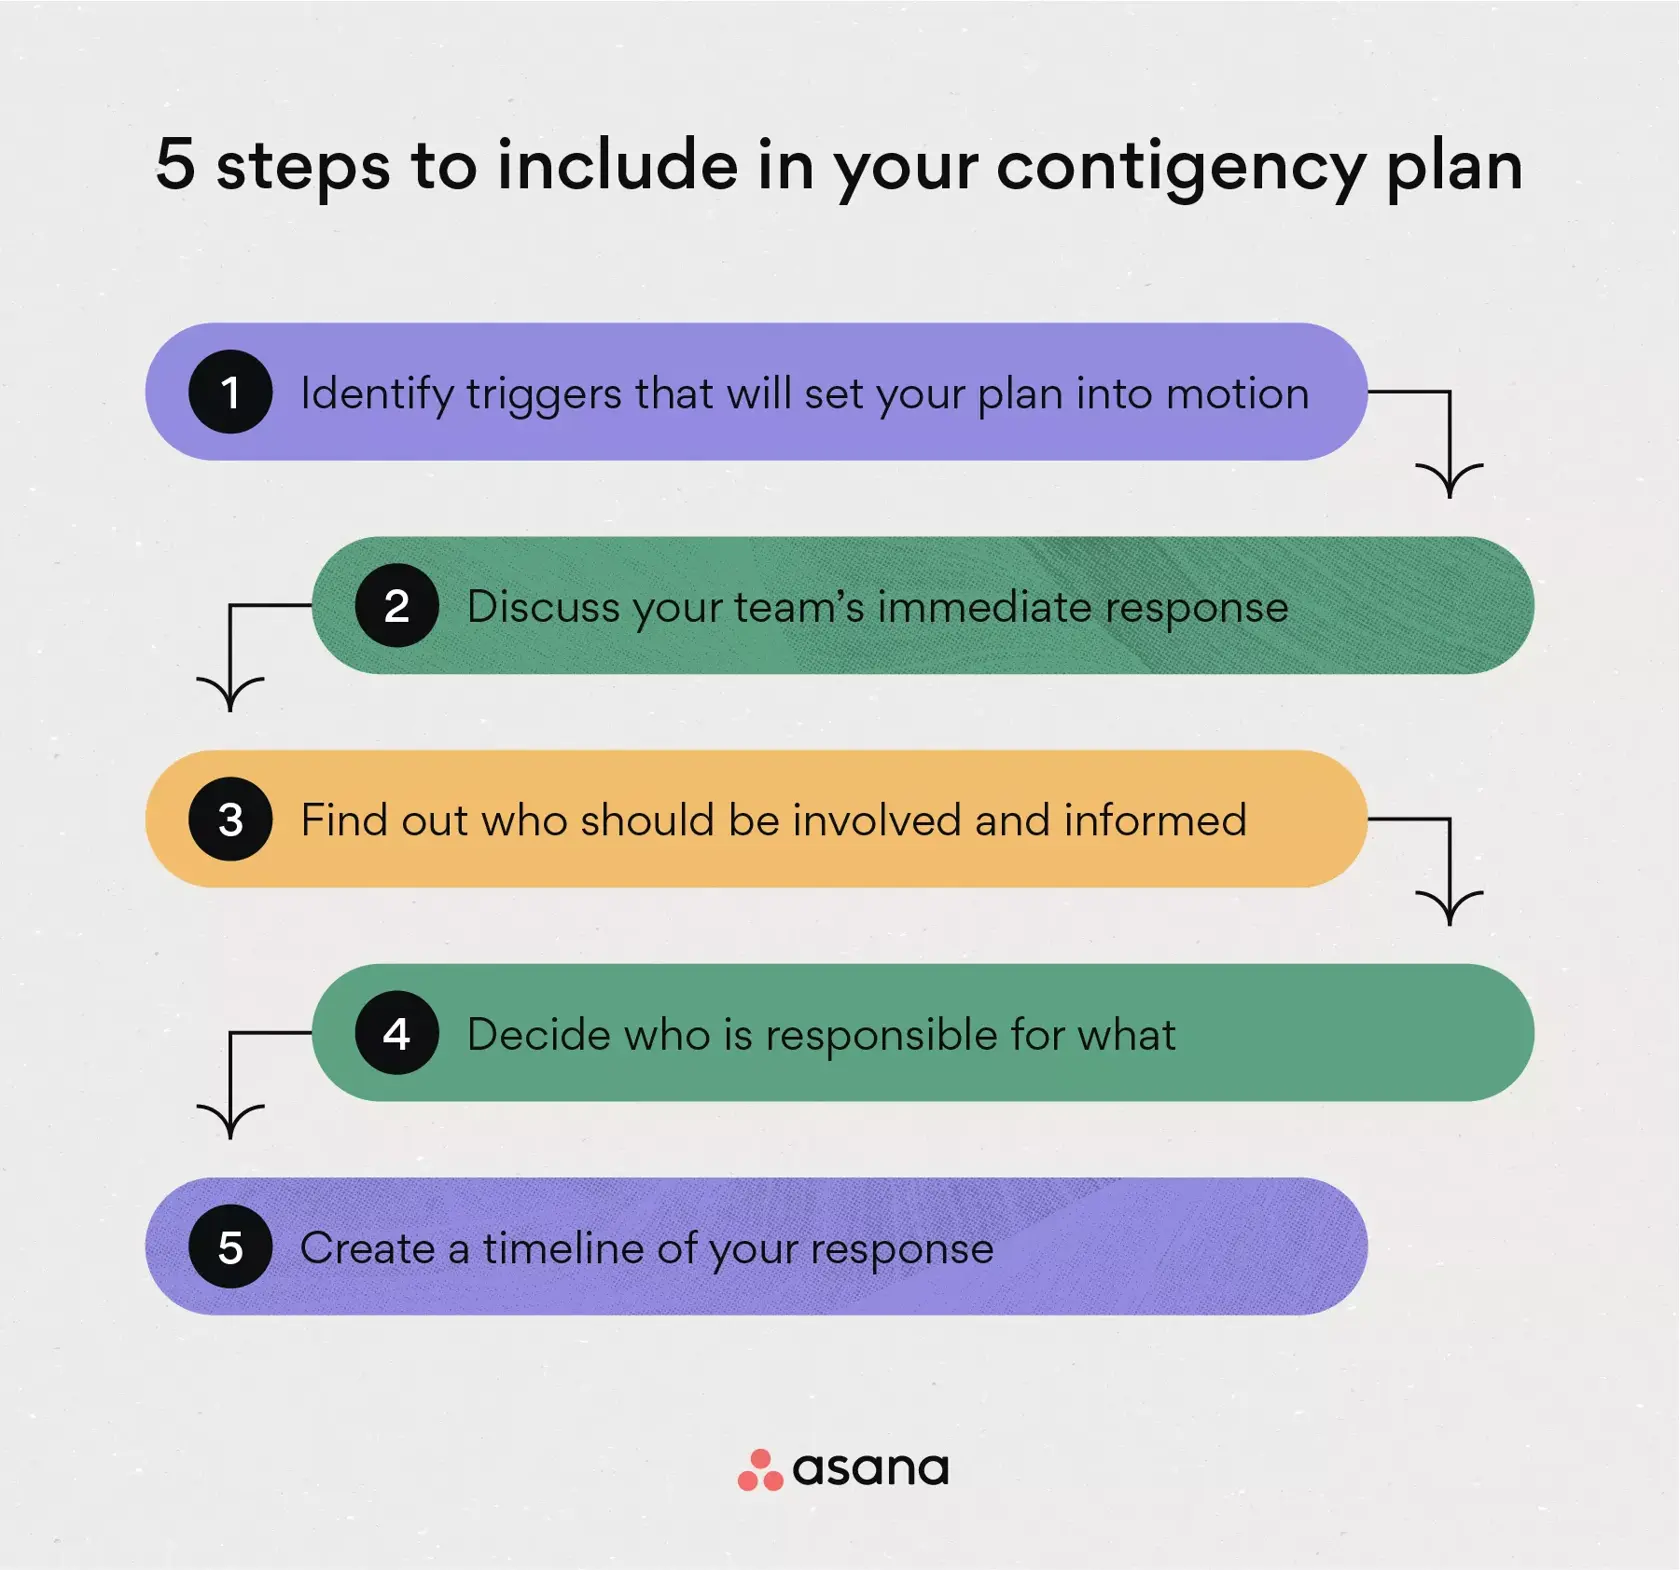 [inline illustration] 5 steps to include in your contingency plan (infographic)